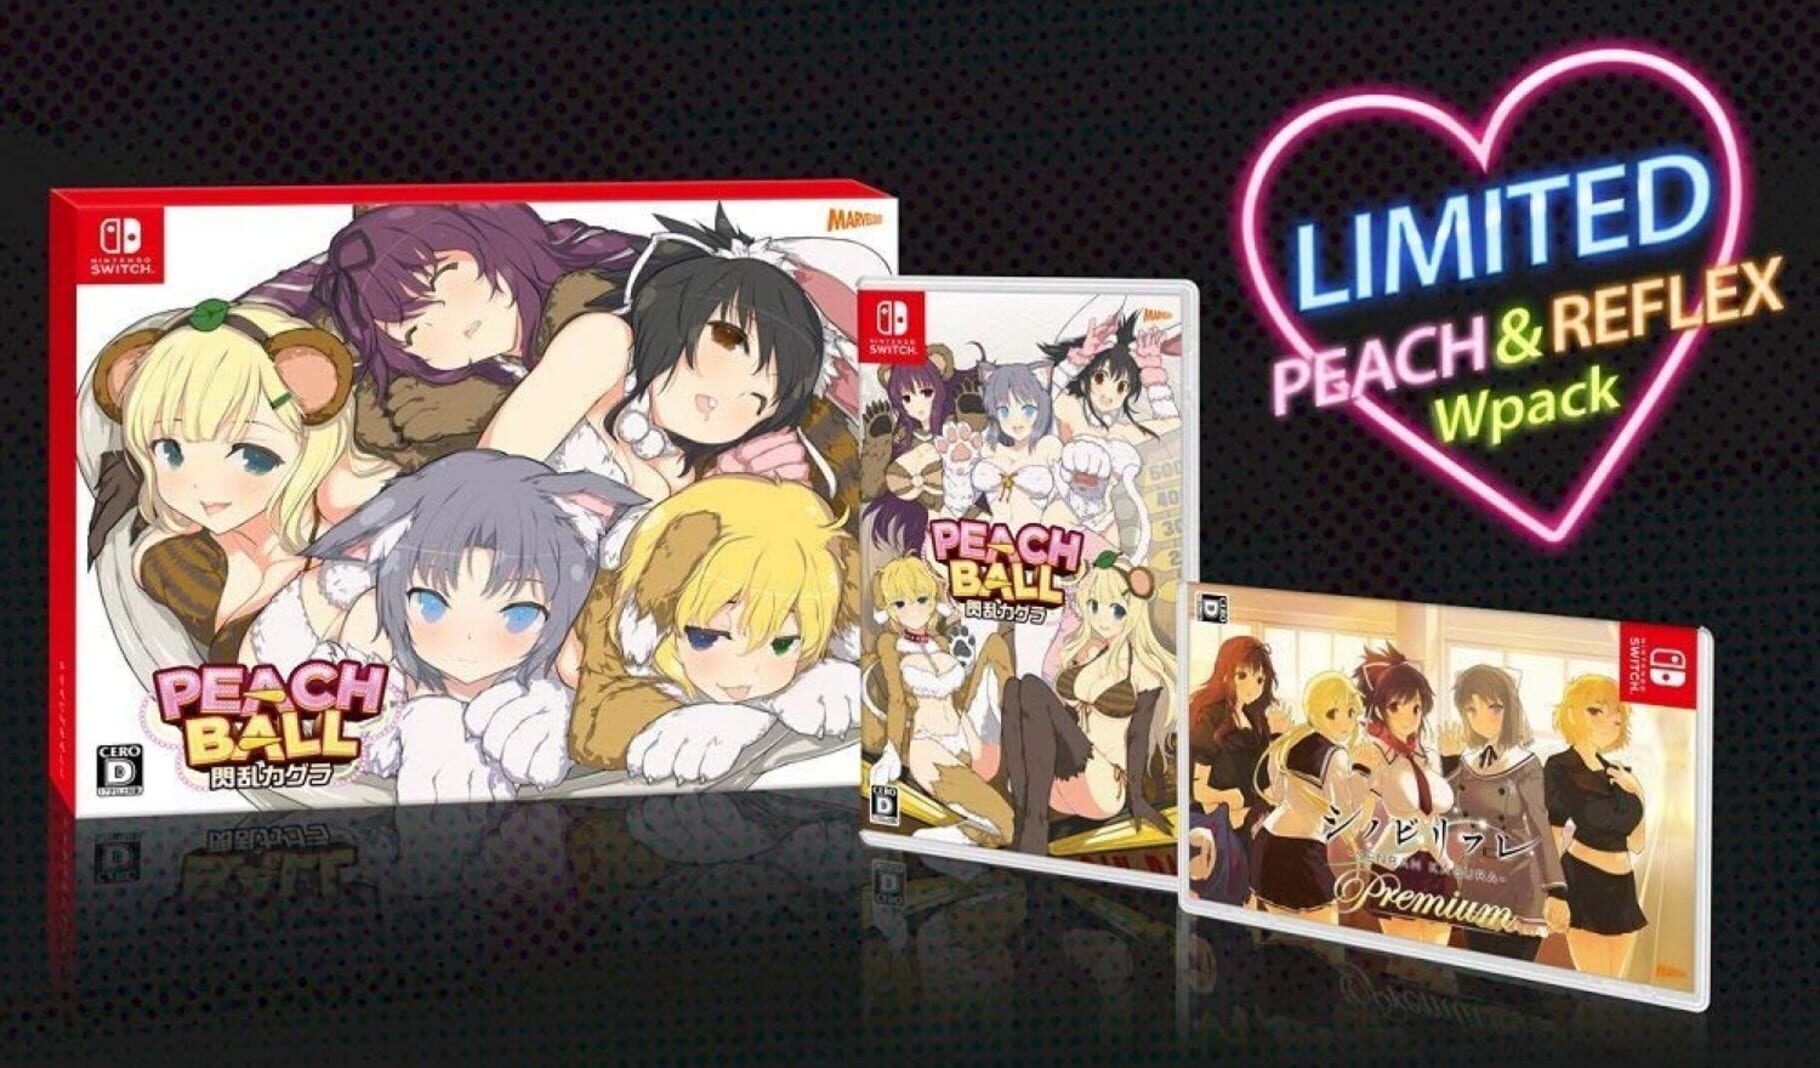 Senran Kagura Peach and Reflextions: Limited Double Pack Image